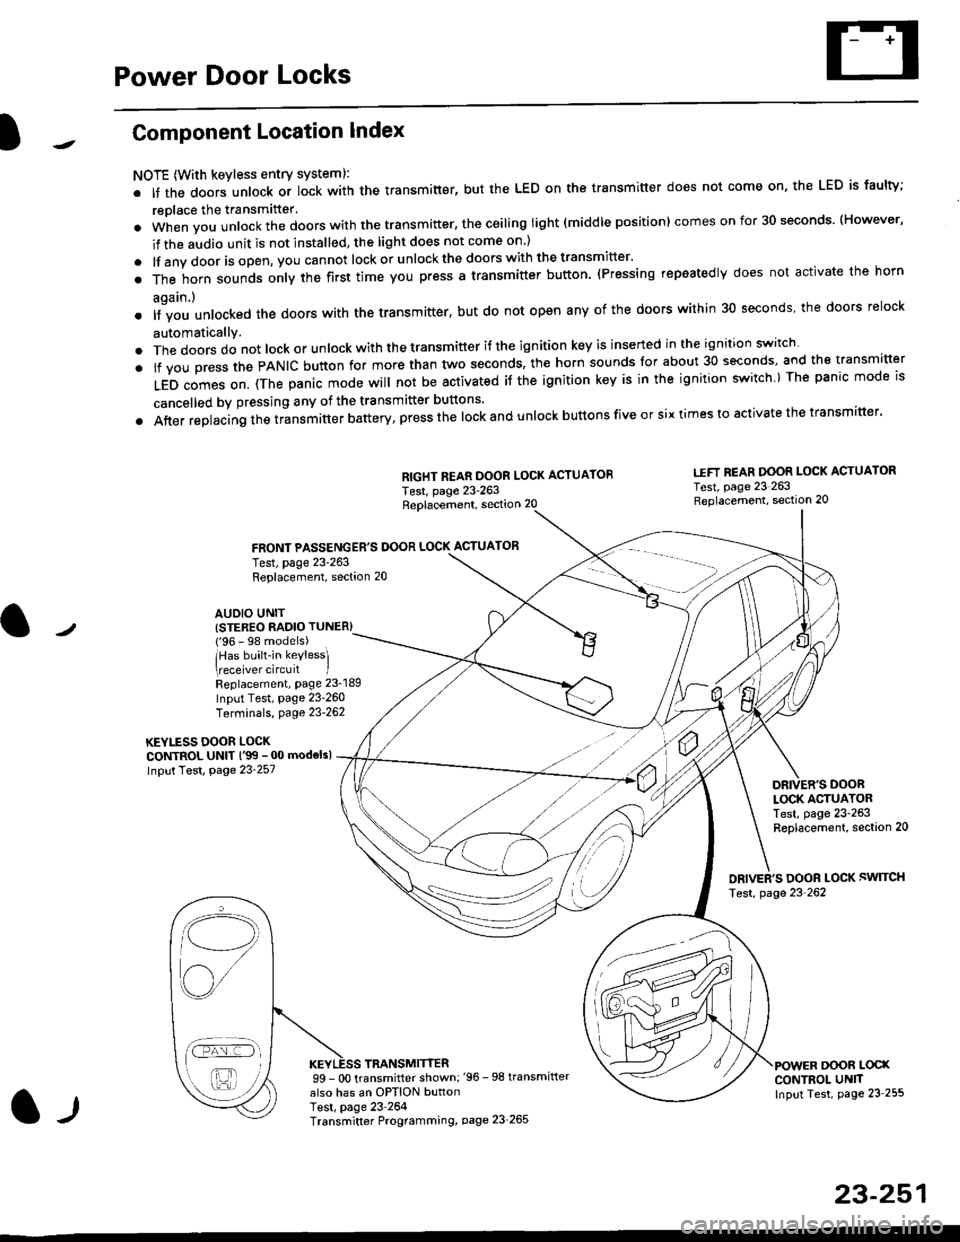 HONDA CIVIC 1997 6.G Owners Manual Power Door Locks
Component Location Index
NOTE (With keyless entry systeml:
. It the doors unlock or lock with the transmitter, but the LED on the transmitter does not come on, the LED is faulty;
repl